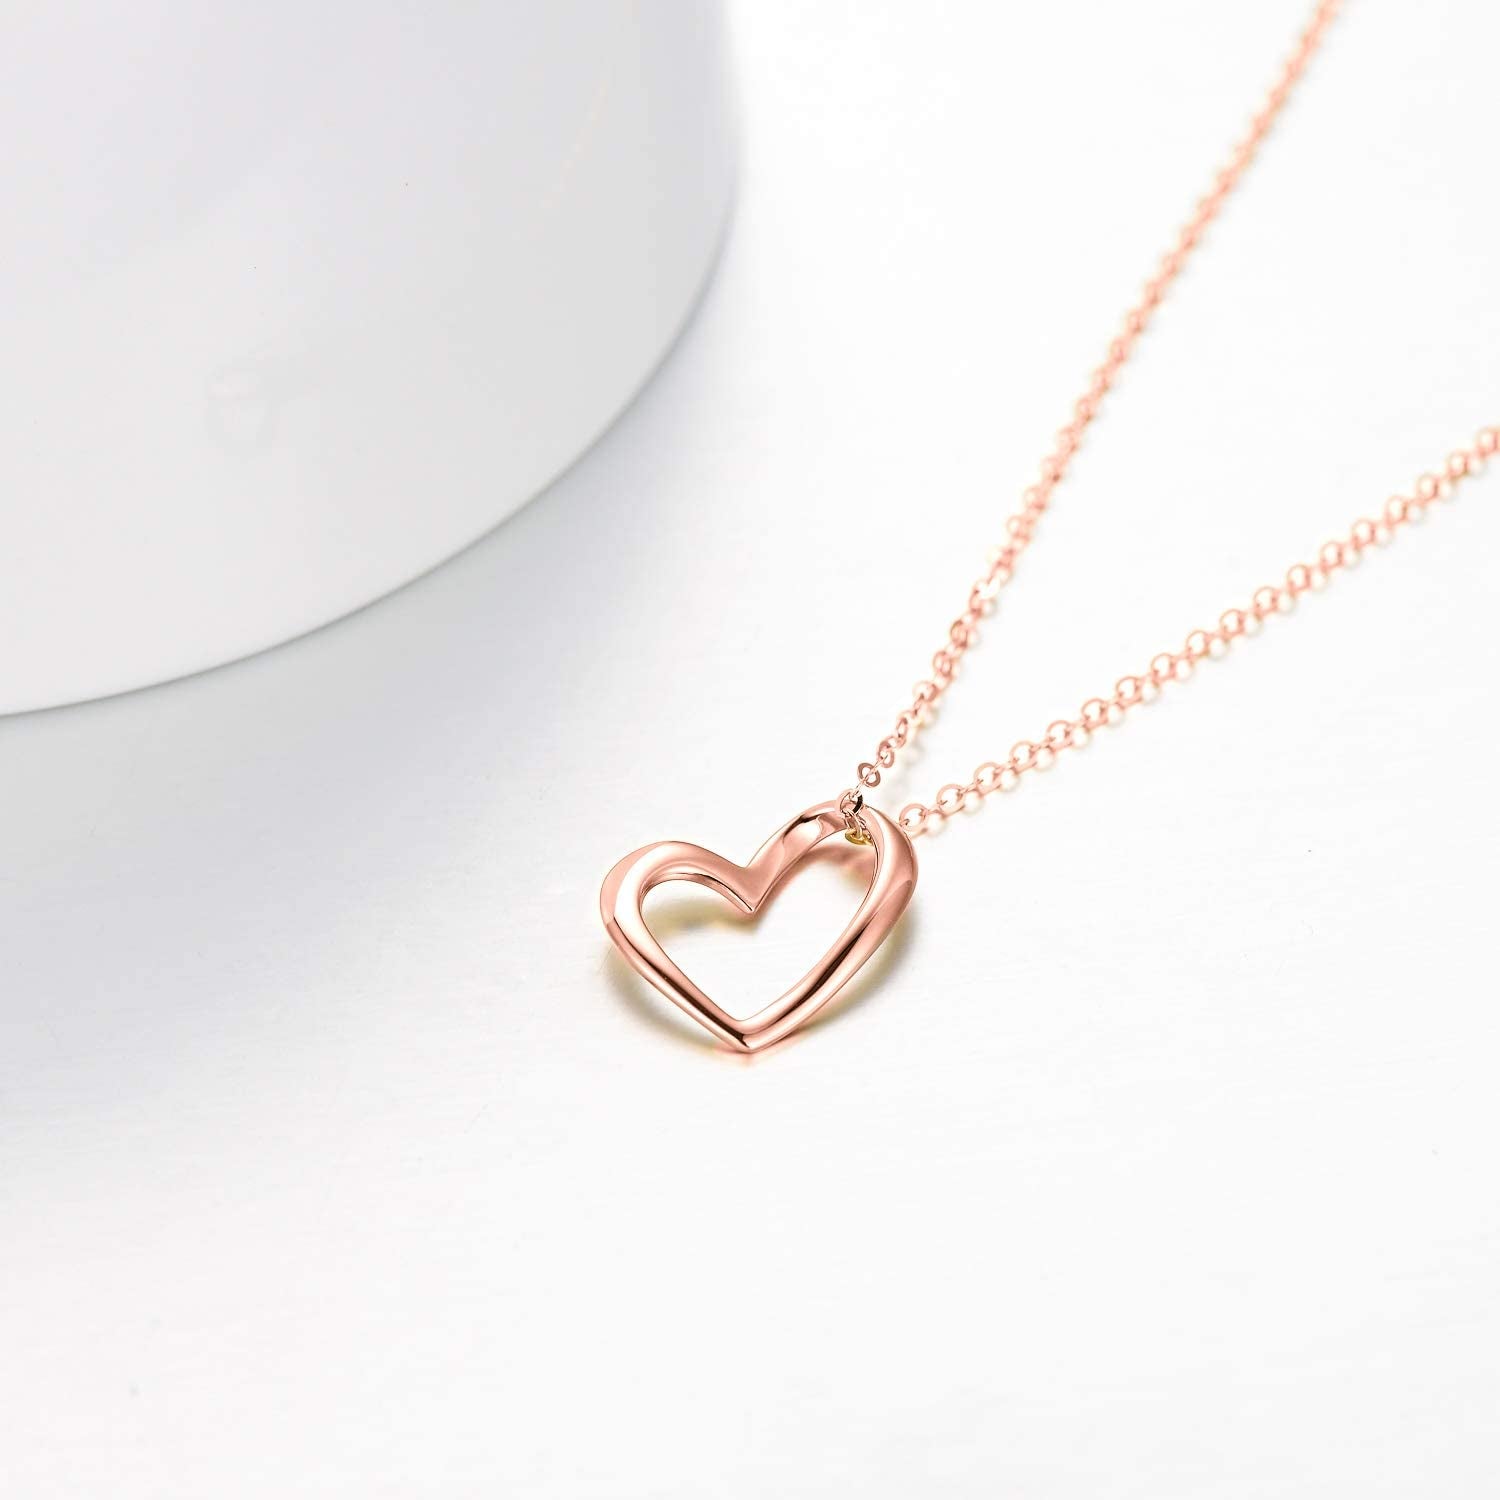 Solid 14K Gold Heart Necklace for Women, Fine Gold Love Jewelry Gifts for Wife/Mother/Girlfriend, Birthday Pesent for Her, 16+2 Inch